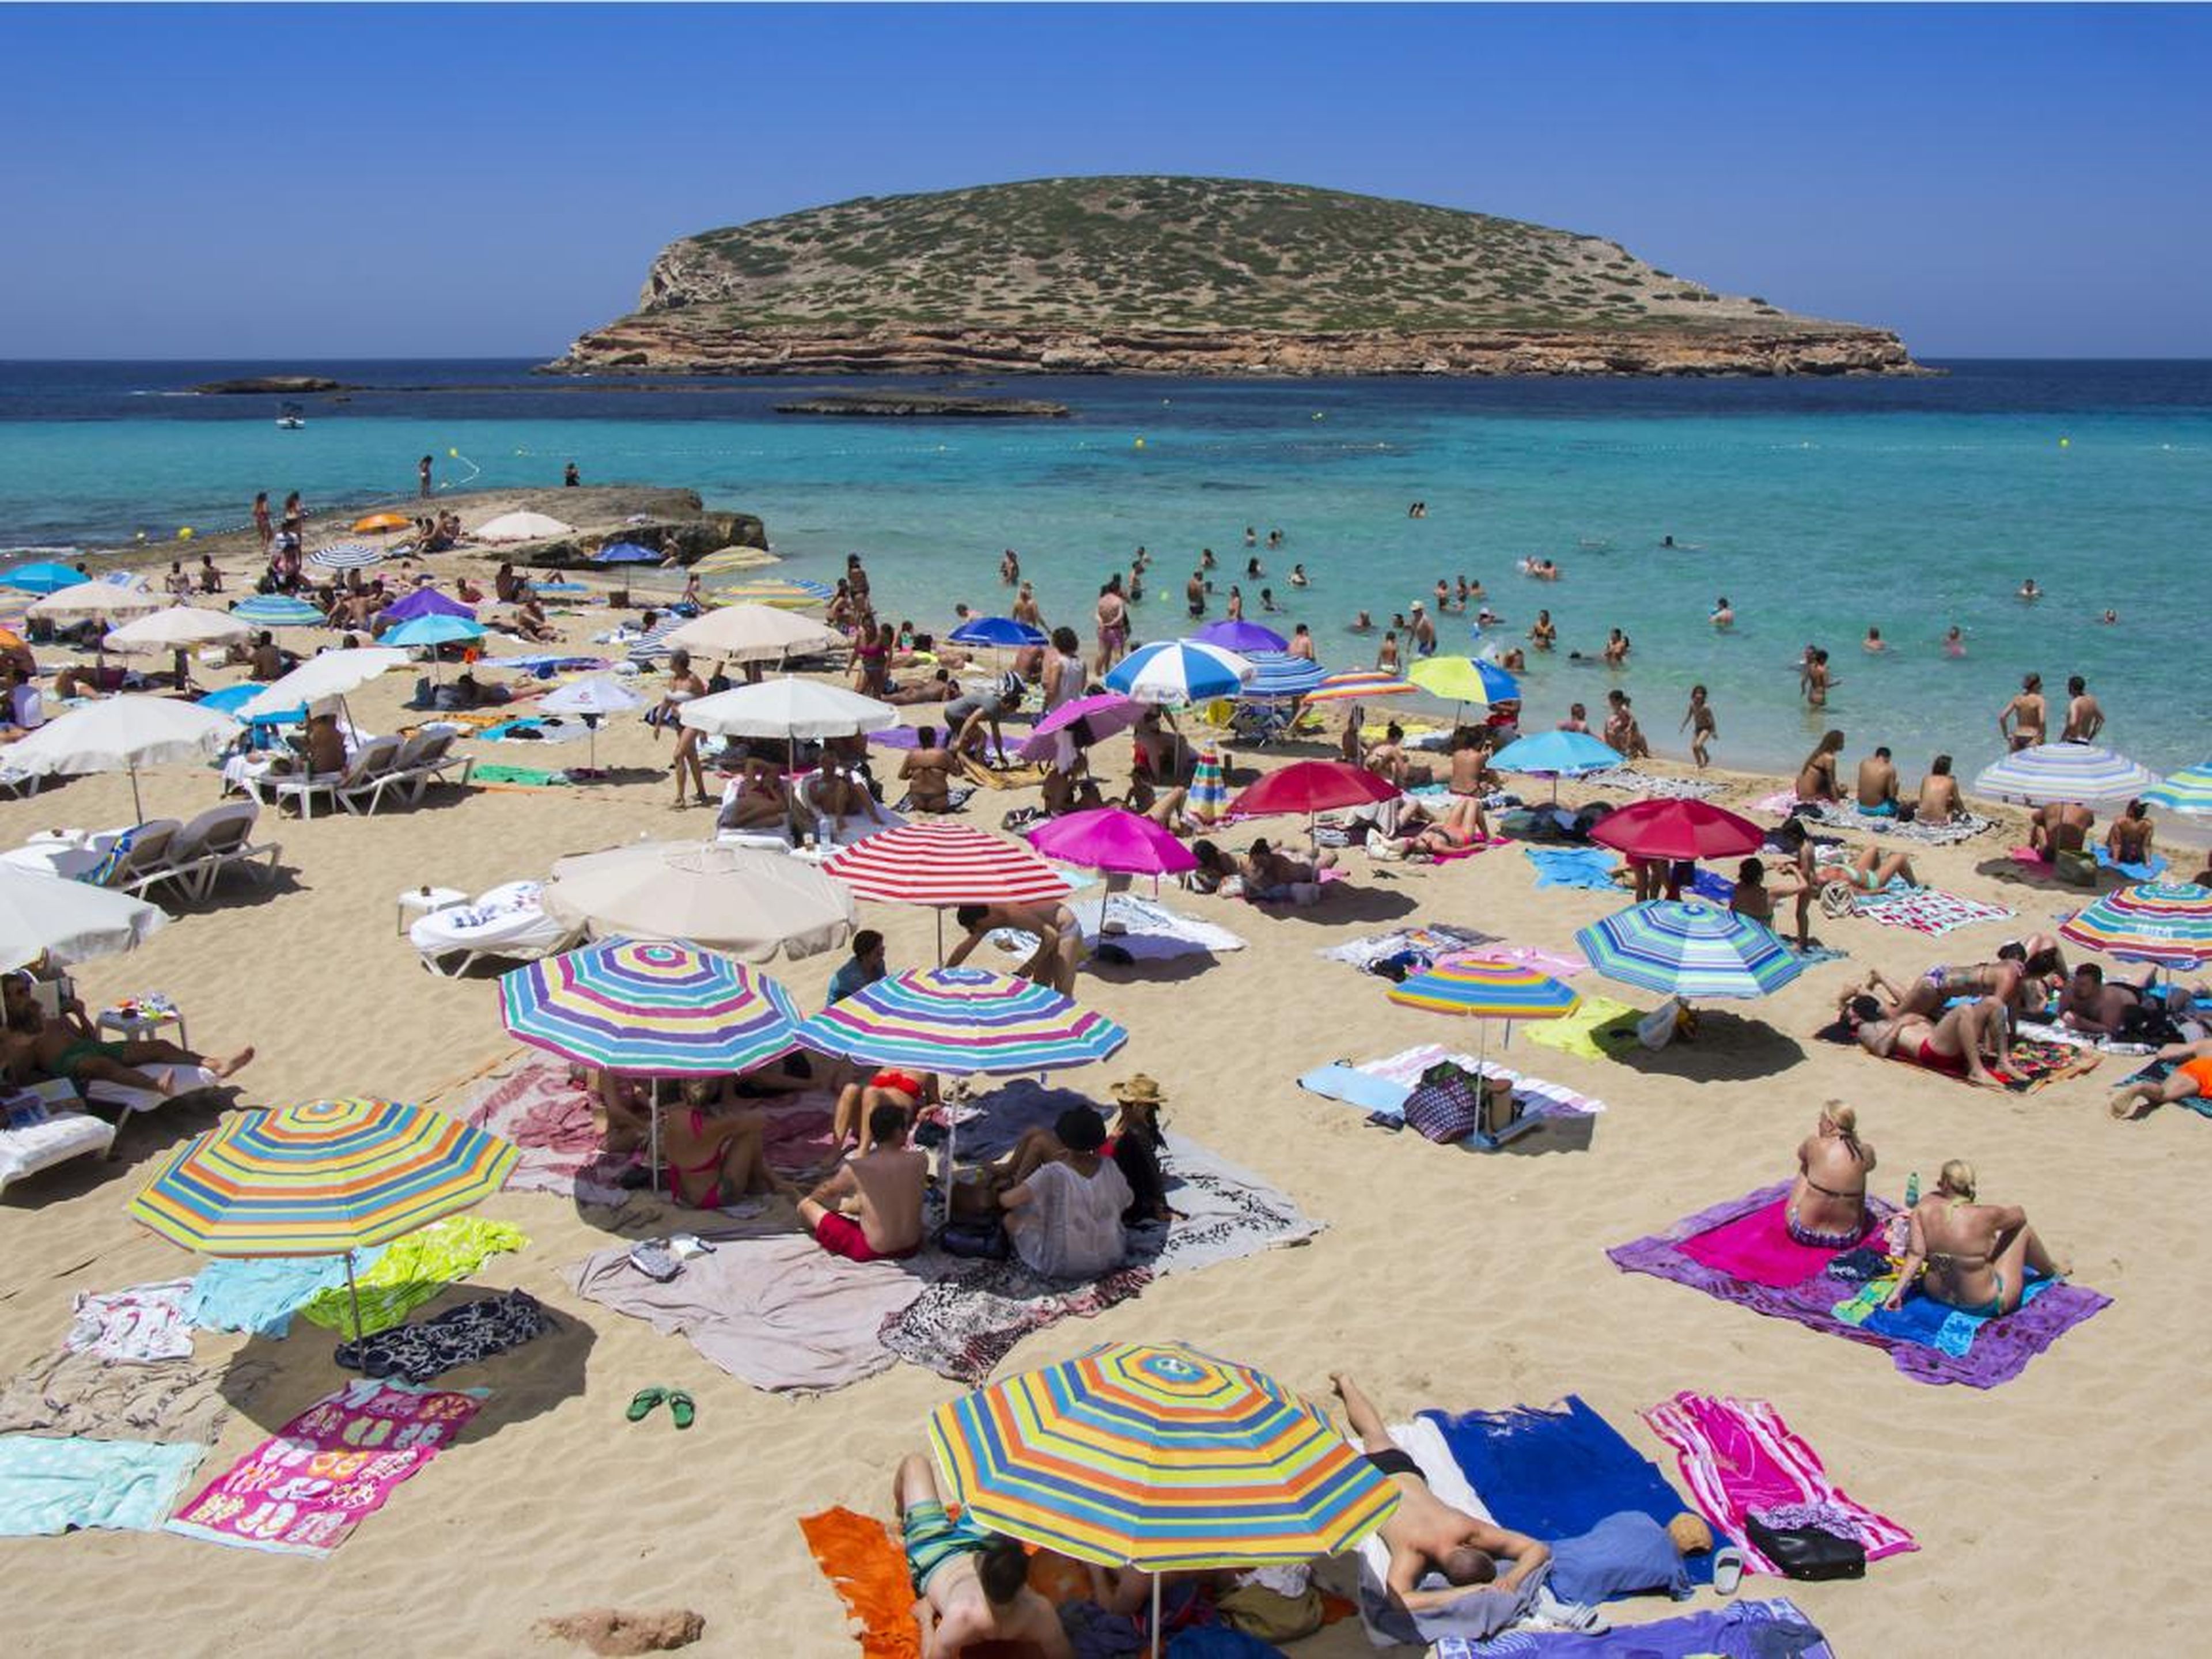 As Ibiza is considerably larger than Mykonos, there's a lot more variety in beaches, like Cala Conta, a gorgeous beach with rock cliffs and sand dunes and ...